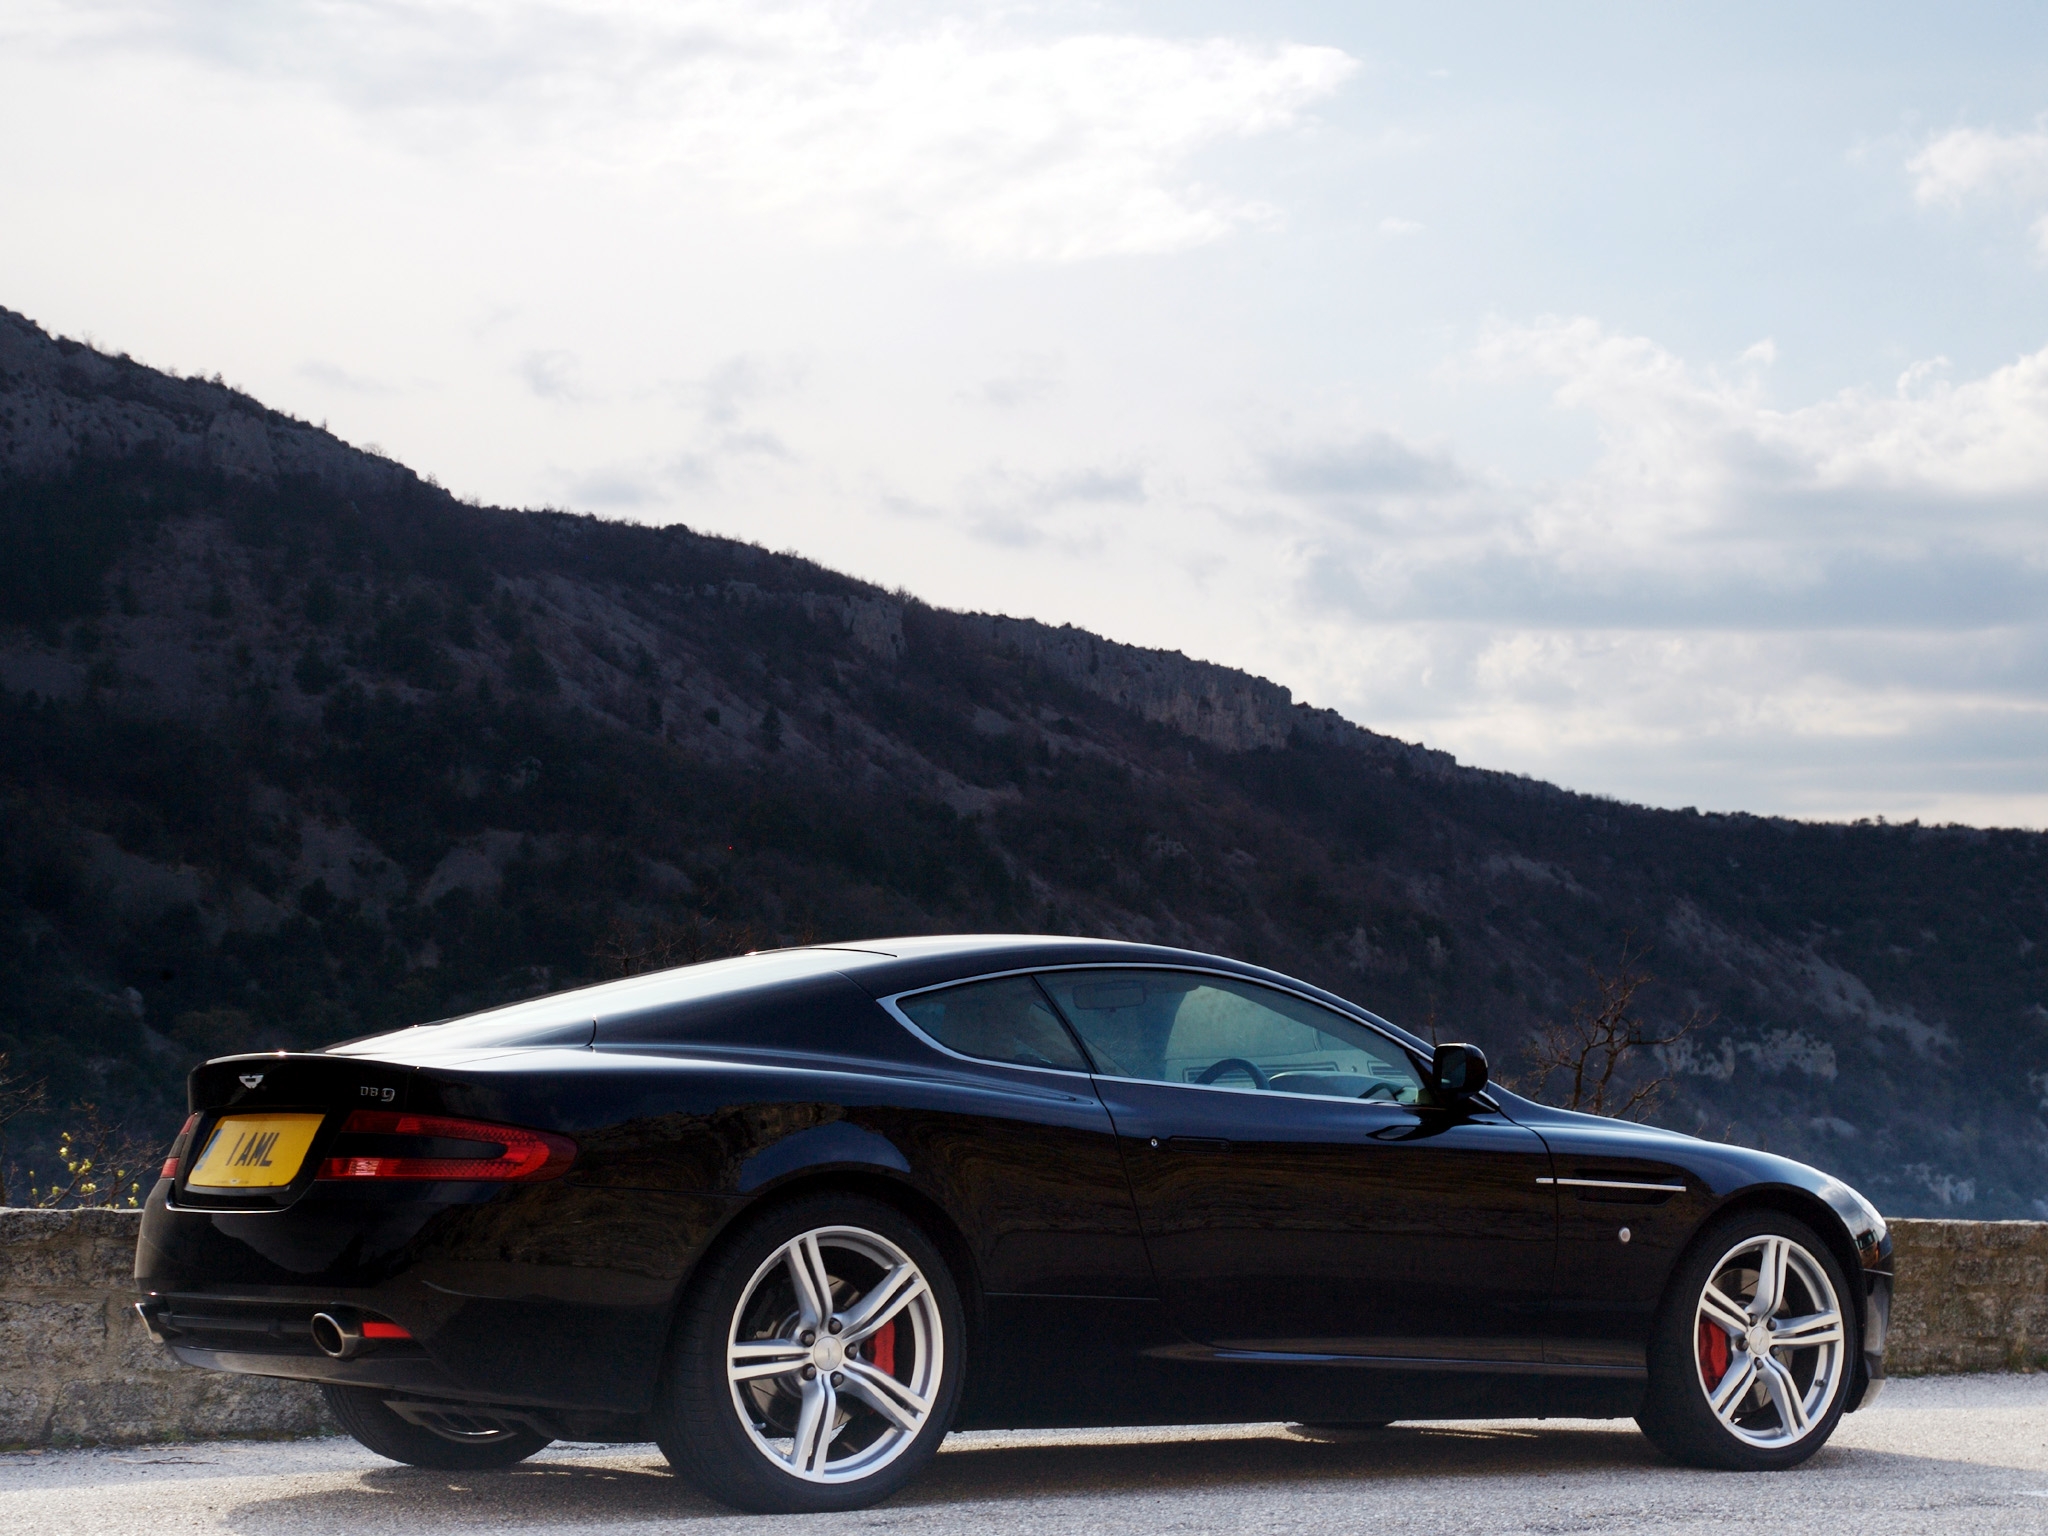 85367 download wallpaper sports, auto, nature, trees, sky, mountains, aston martin, cars, black, side view, style, db9, 2006 screensavers and pictures for free